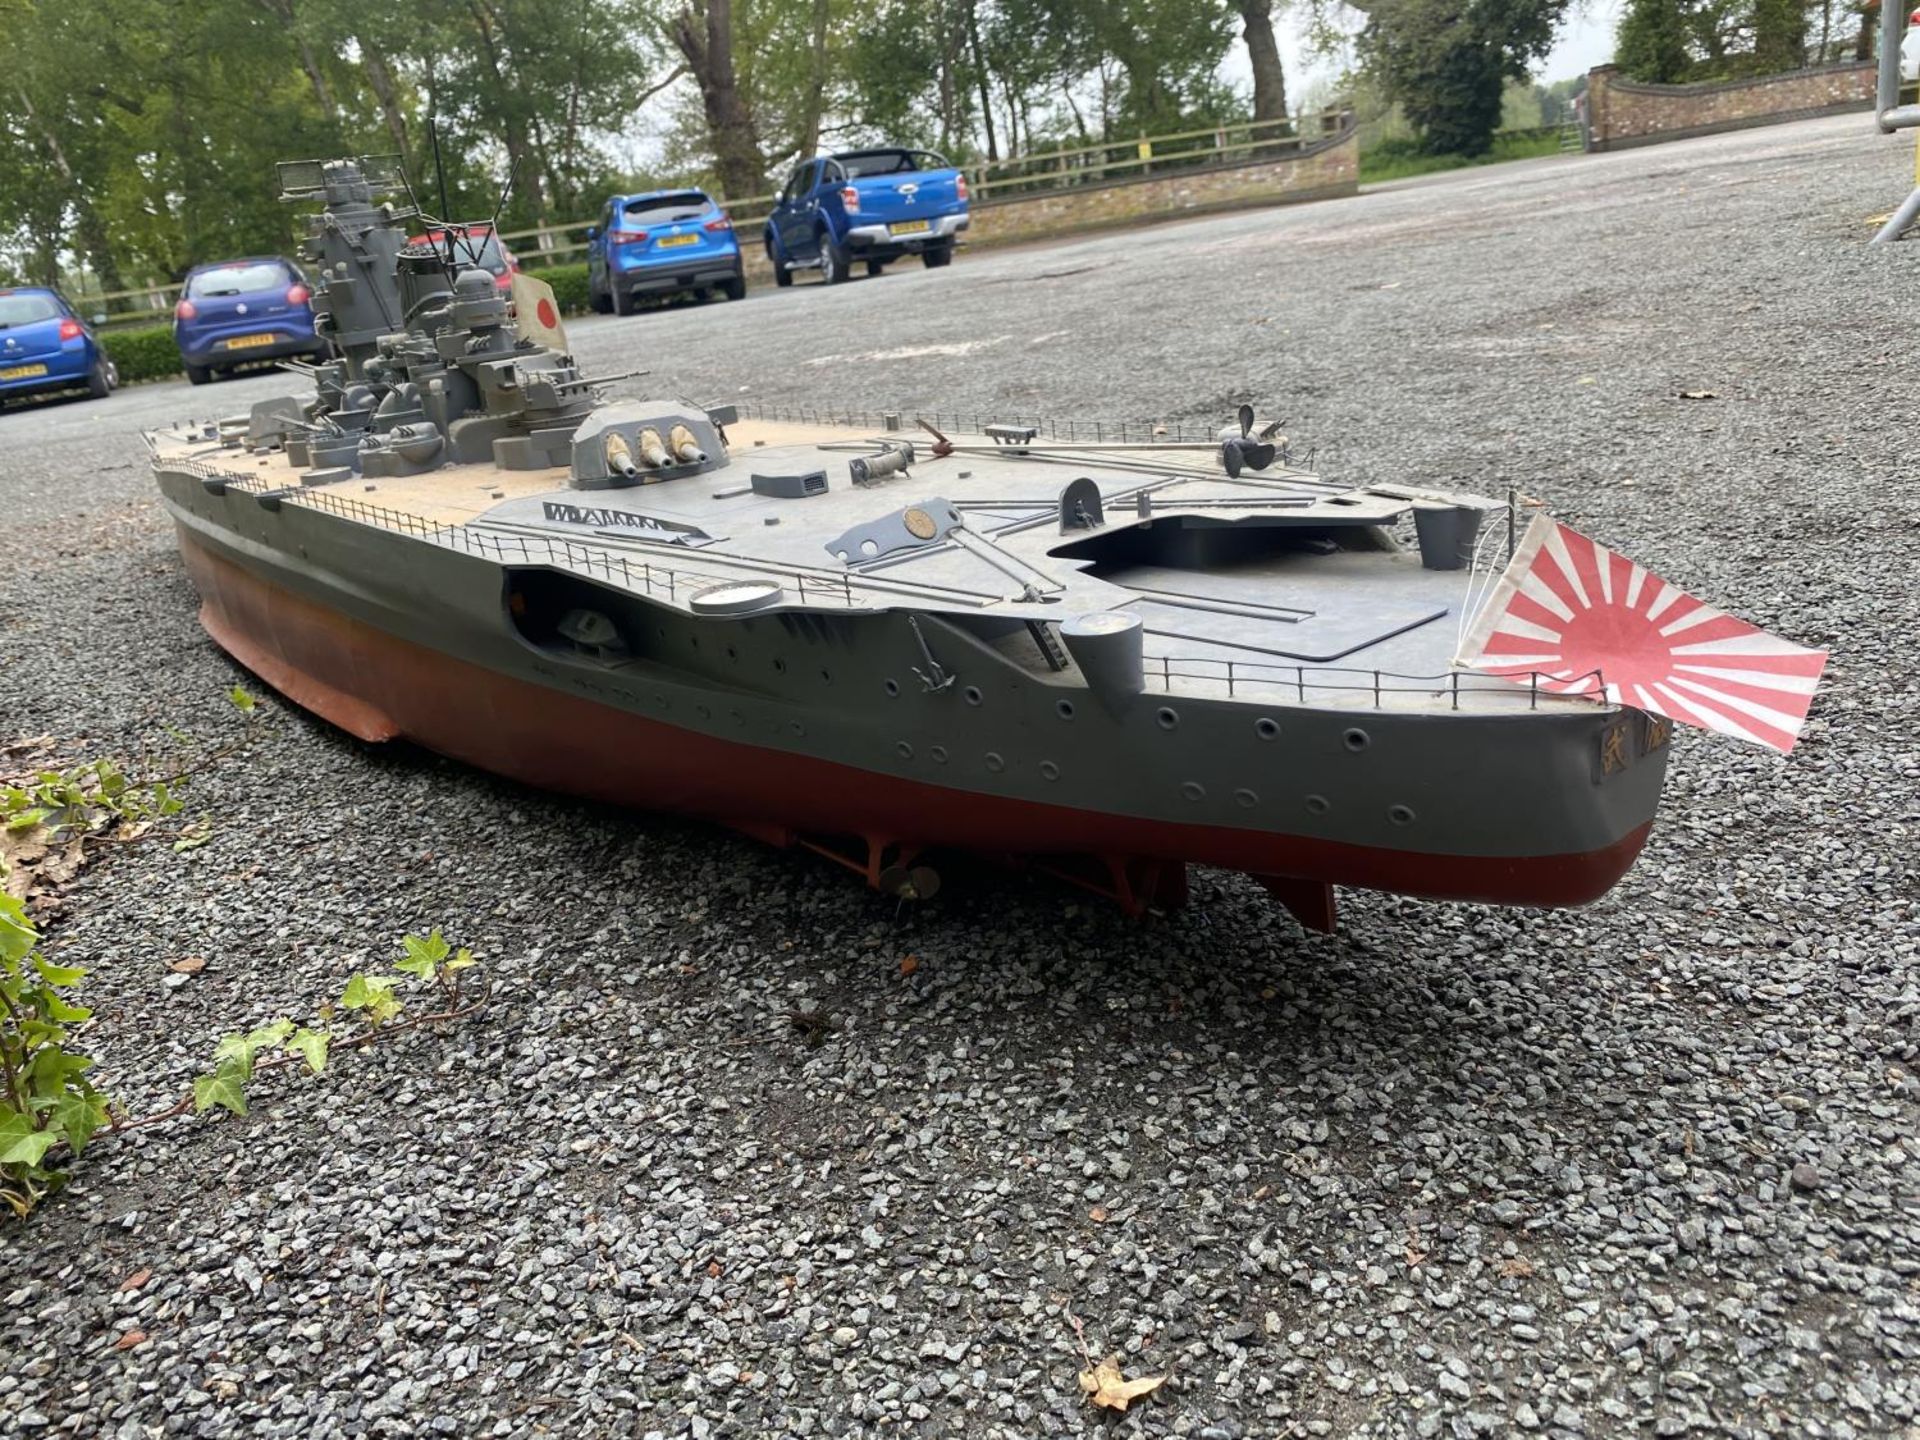 A VERY LARGE MOTORISED REMOTE CONTROLLED MODEL OF WWII JAPANESE MUSASHI / YAMATO WAR SHIP WITH - Image 31 of 42